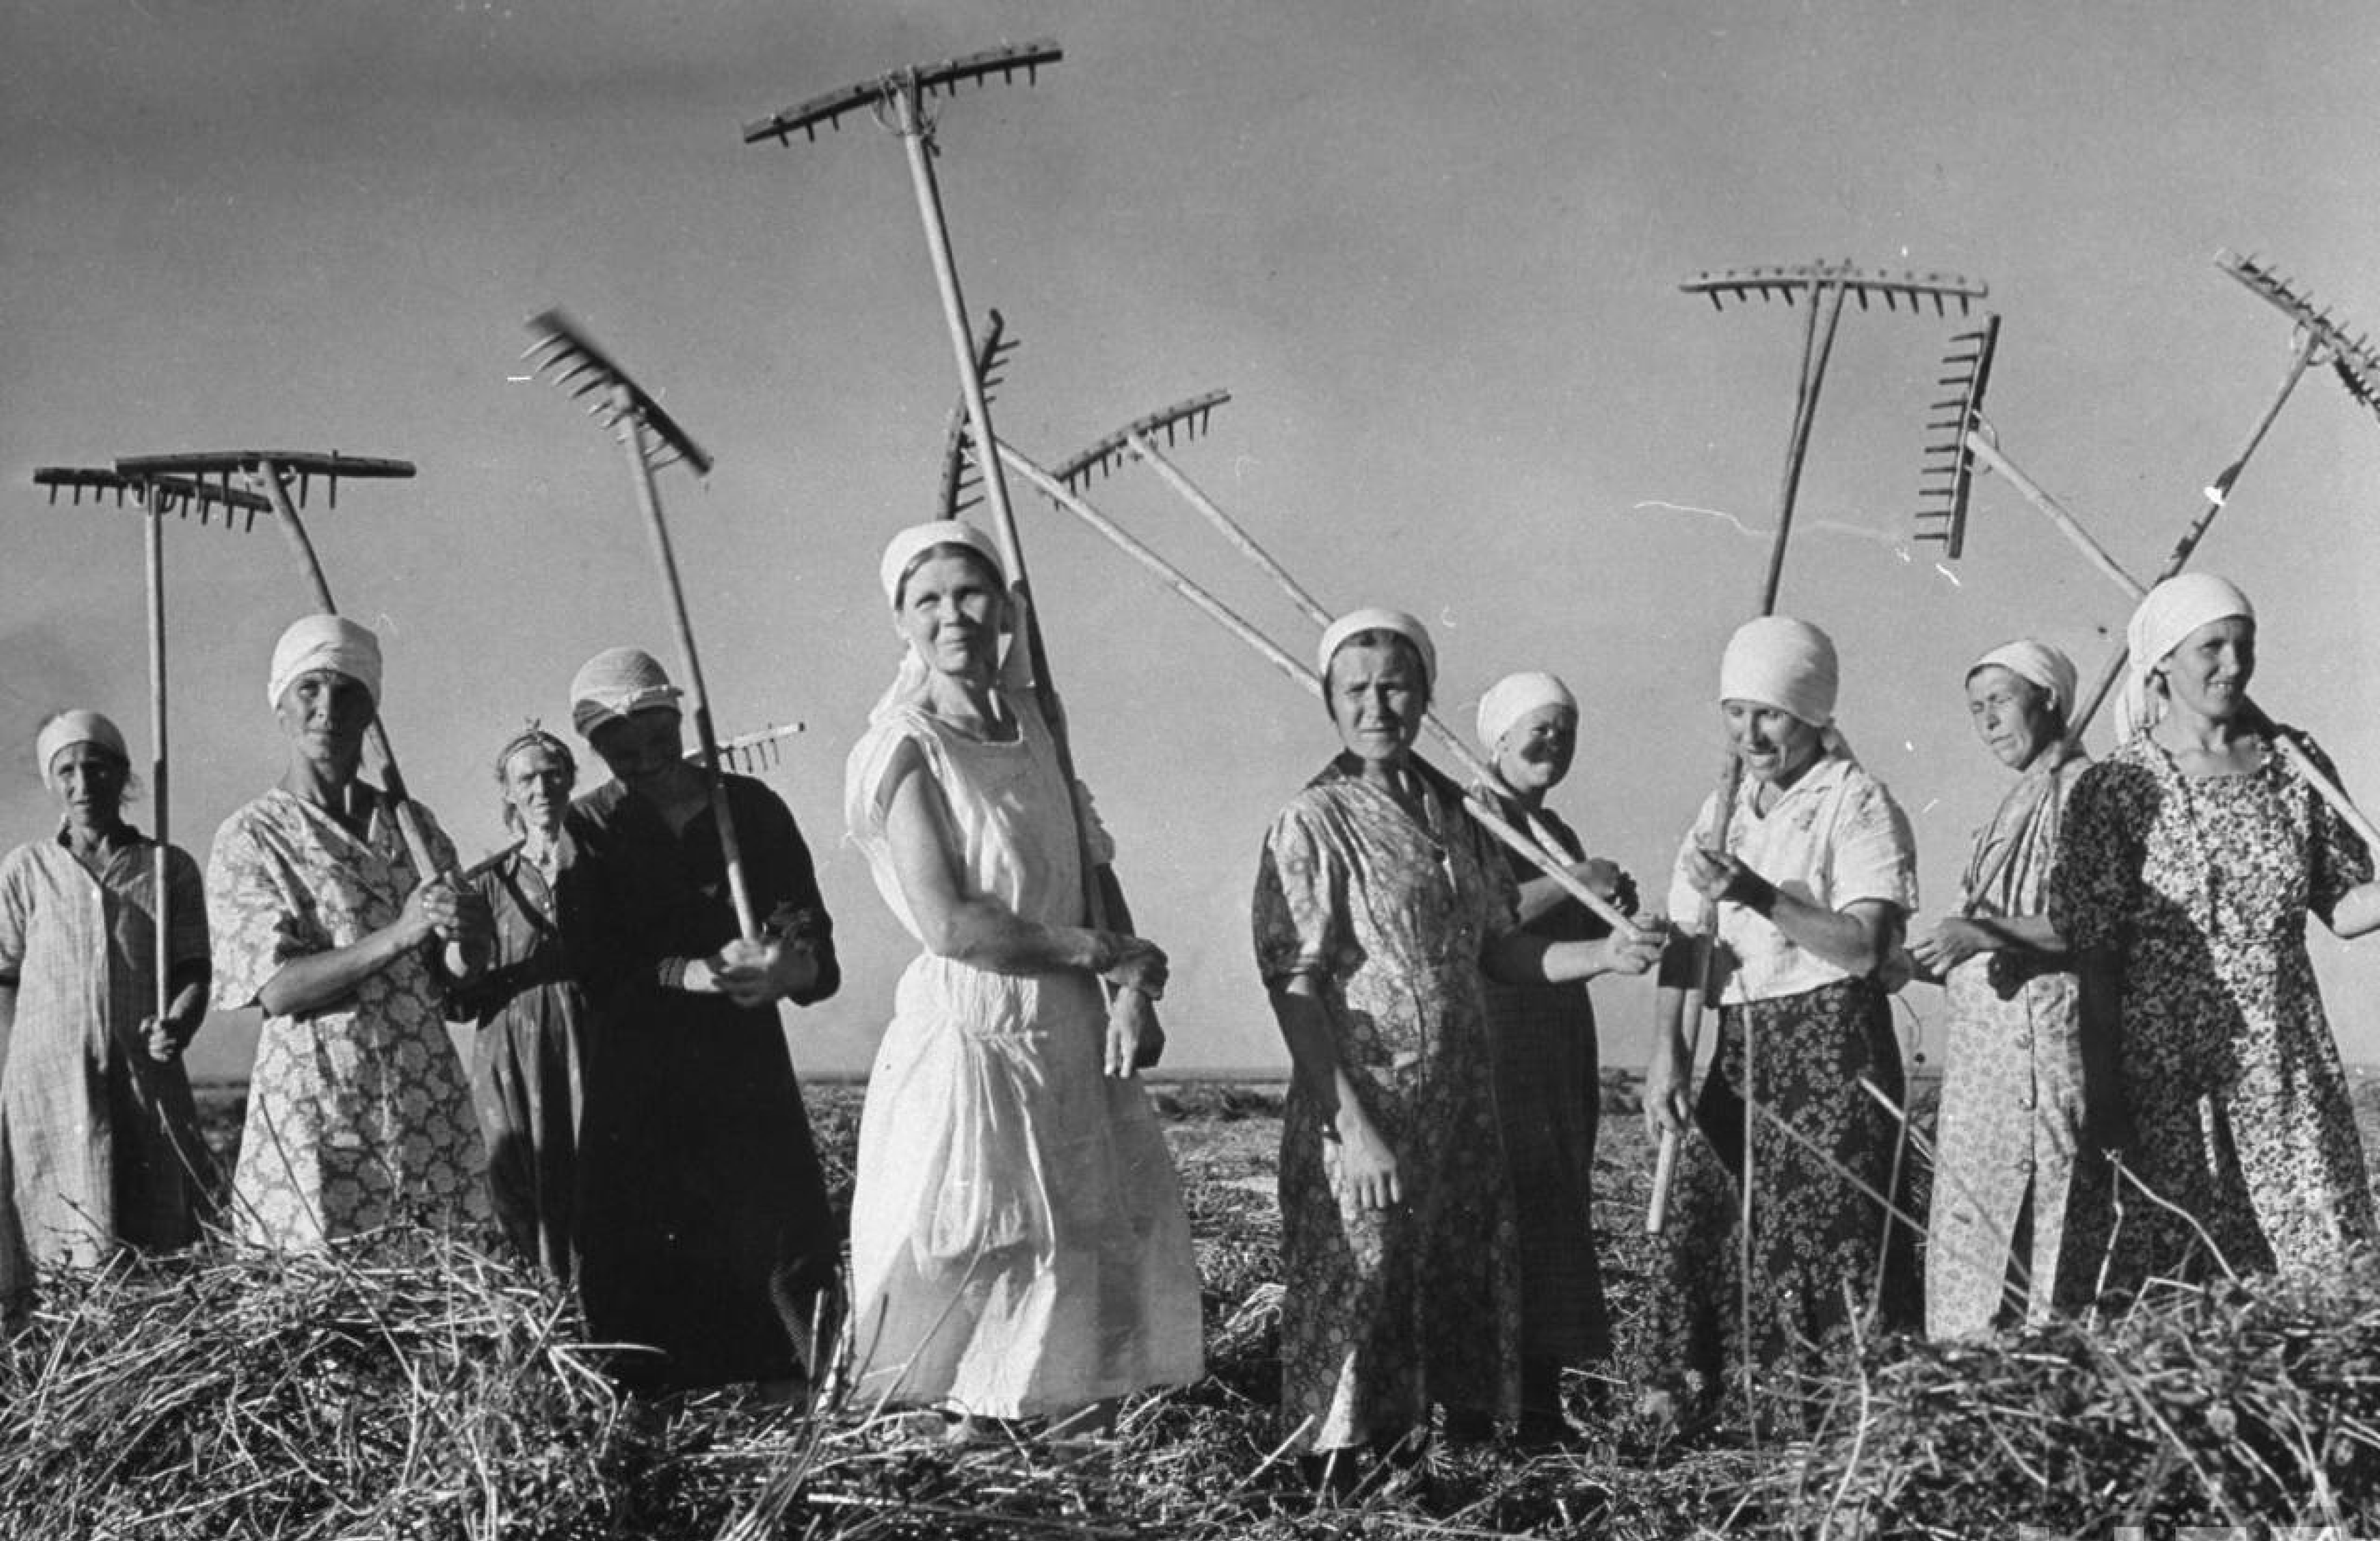 Margaret Bourke-White’s photograph of agricultural workers in the fields of the Soviet Union, 1941